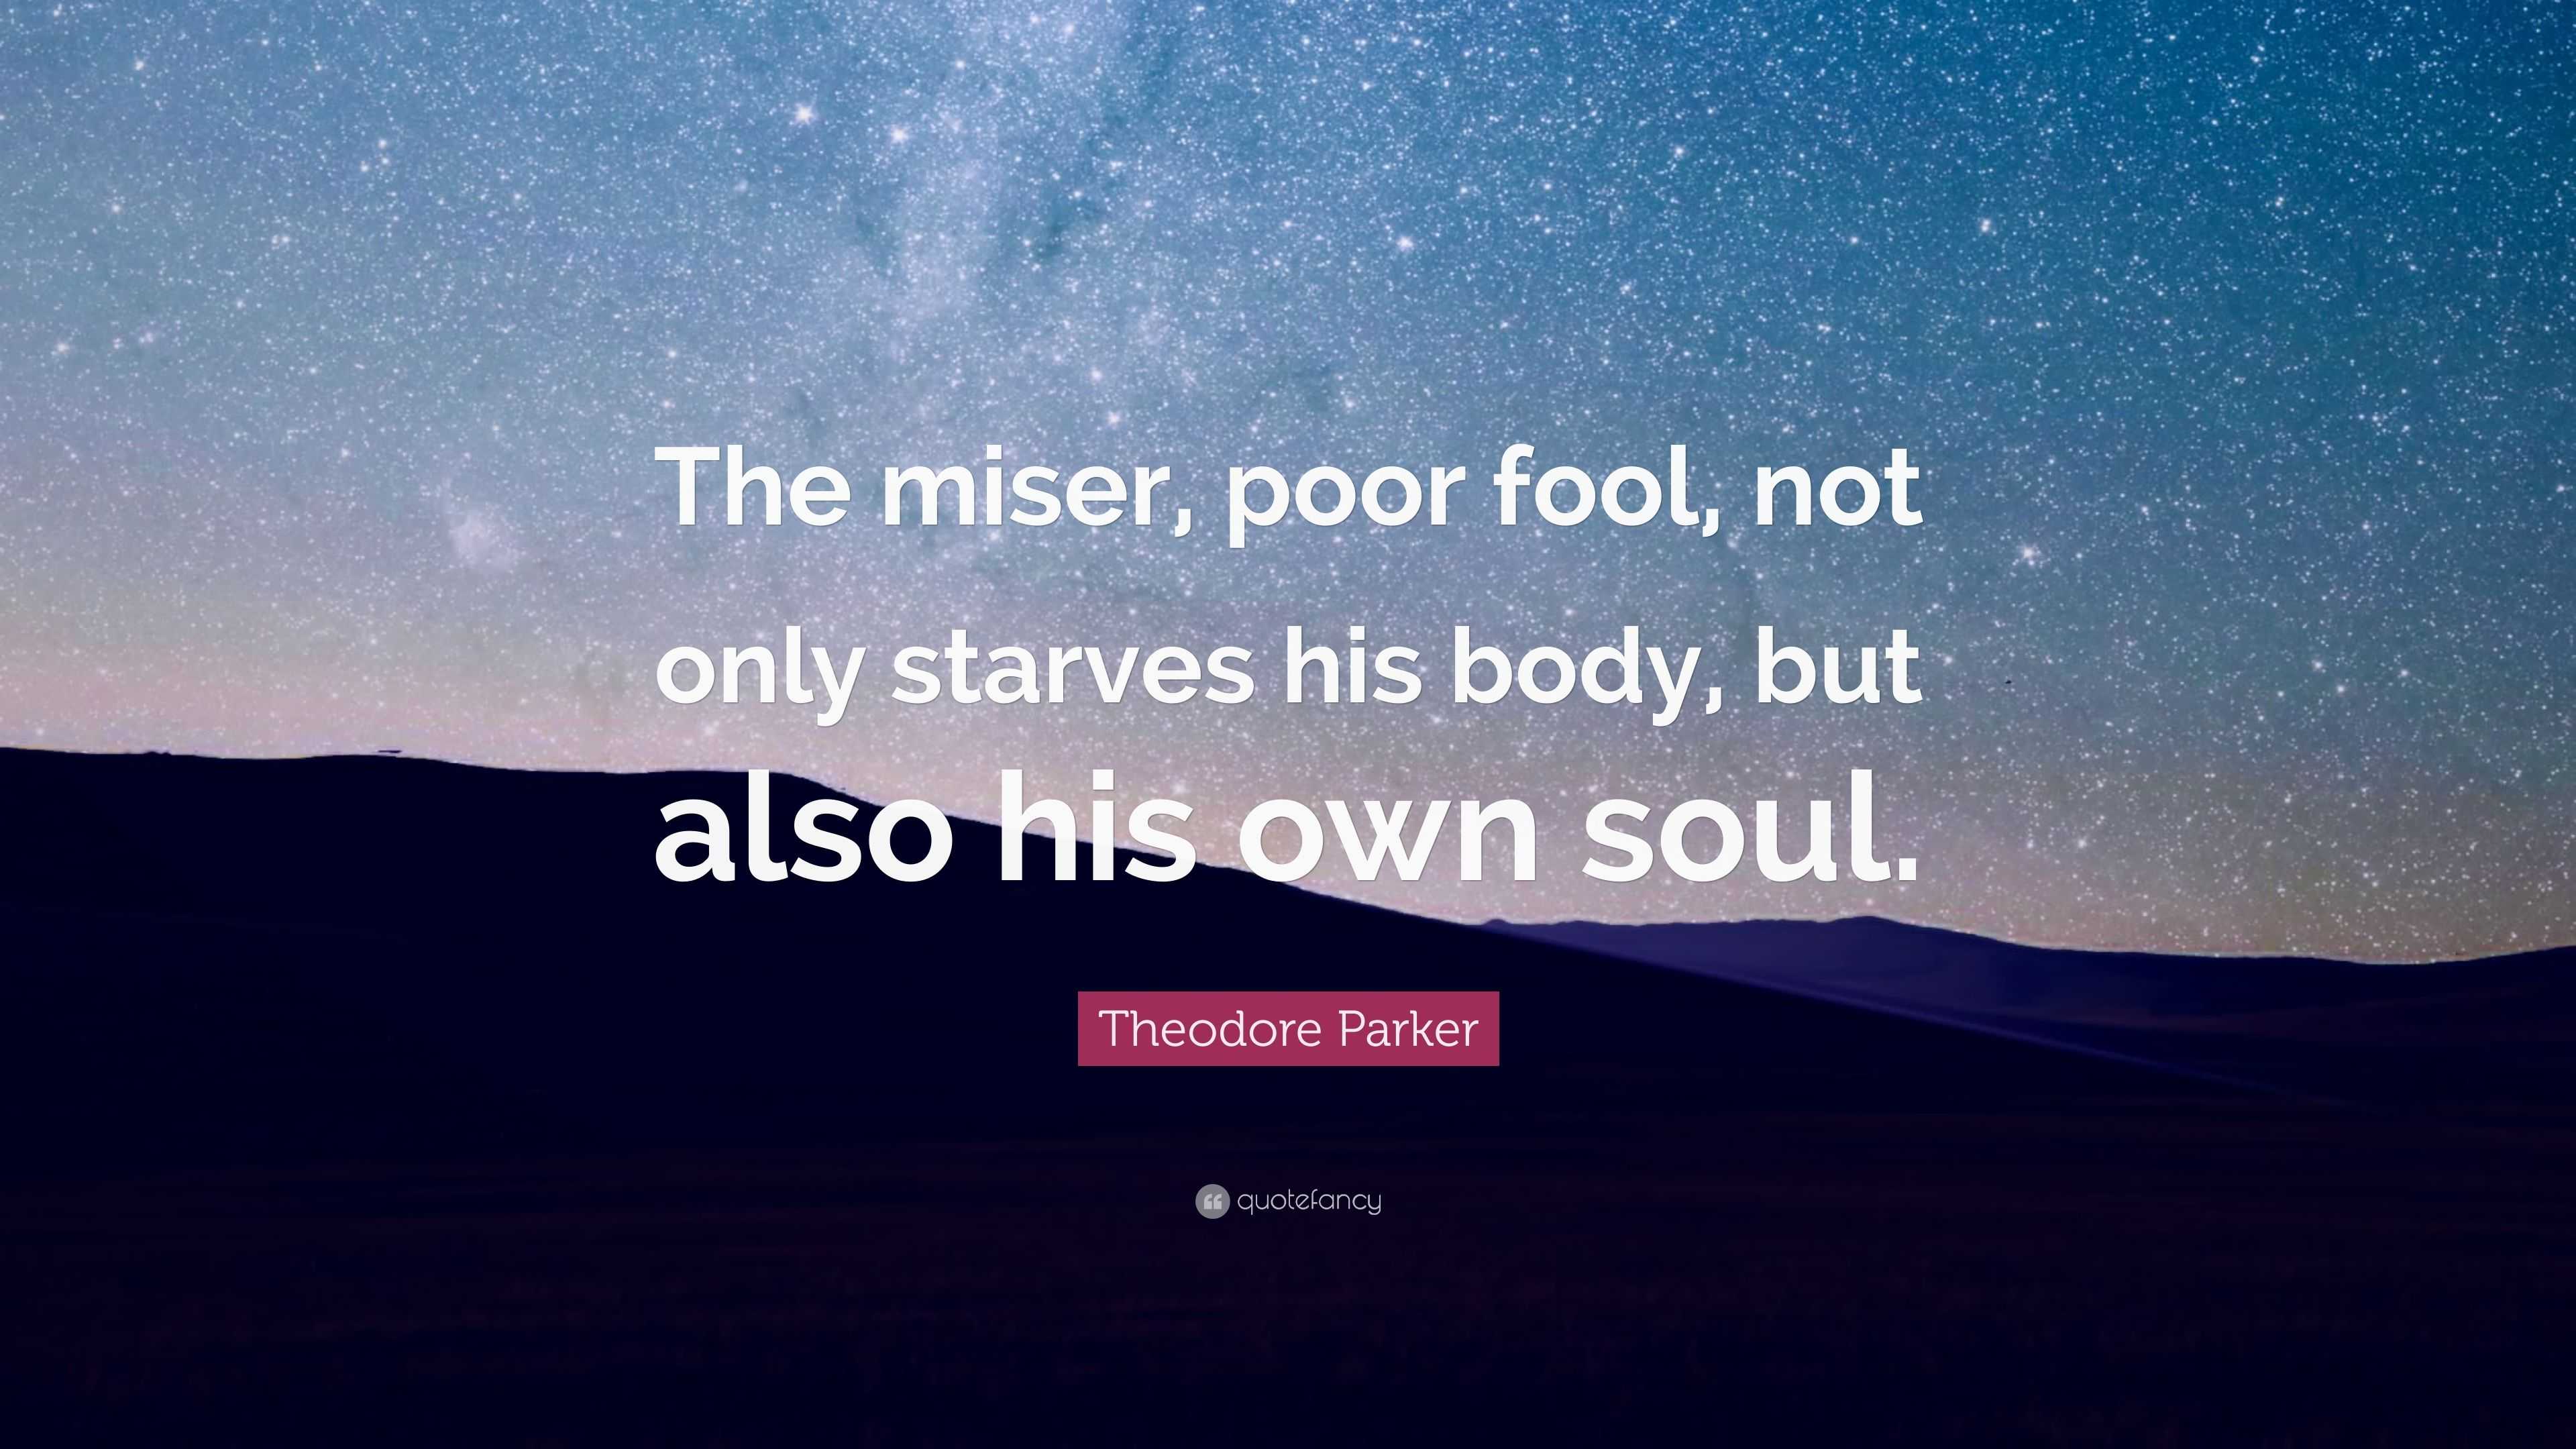 Theodore Parker Quote: “The miser, poor fool, not only starves his body ...